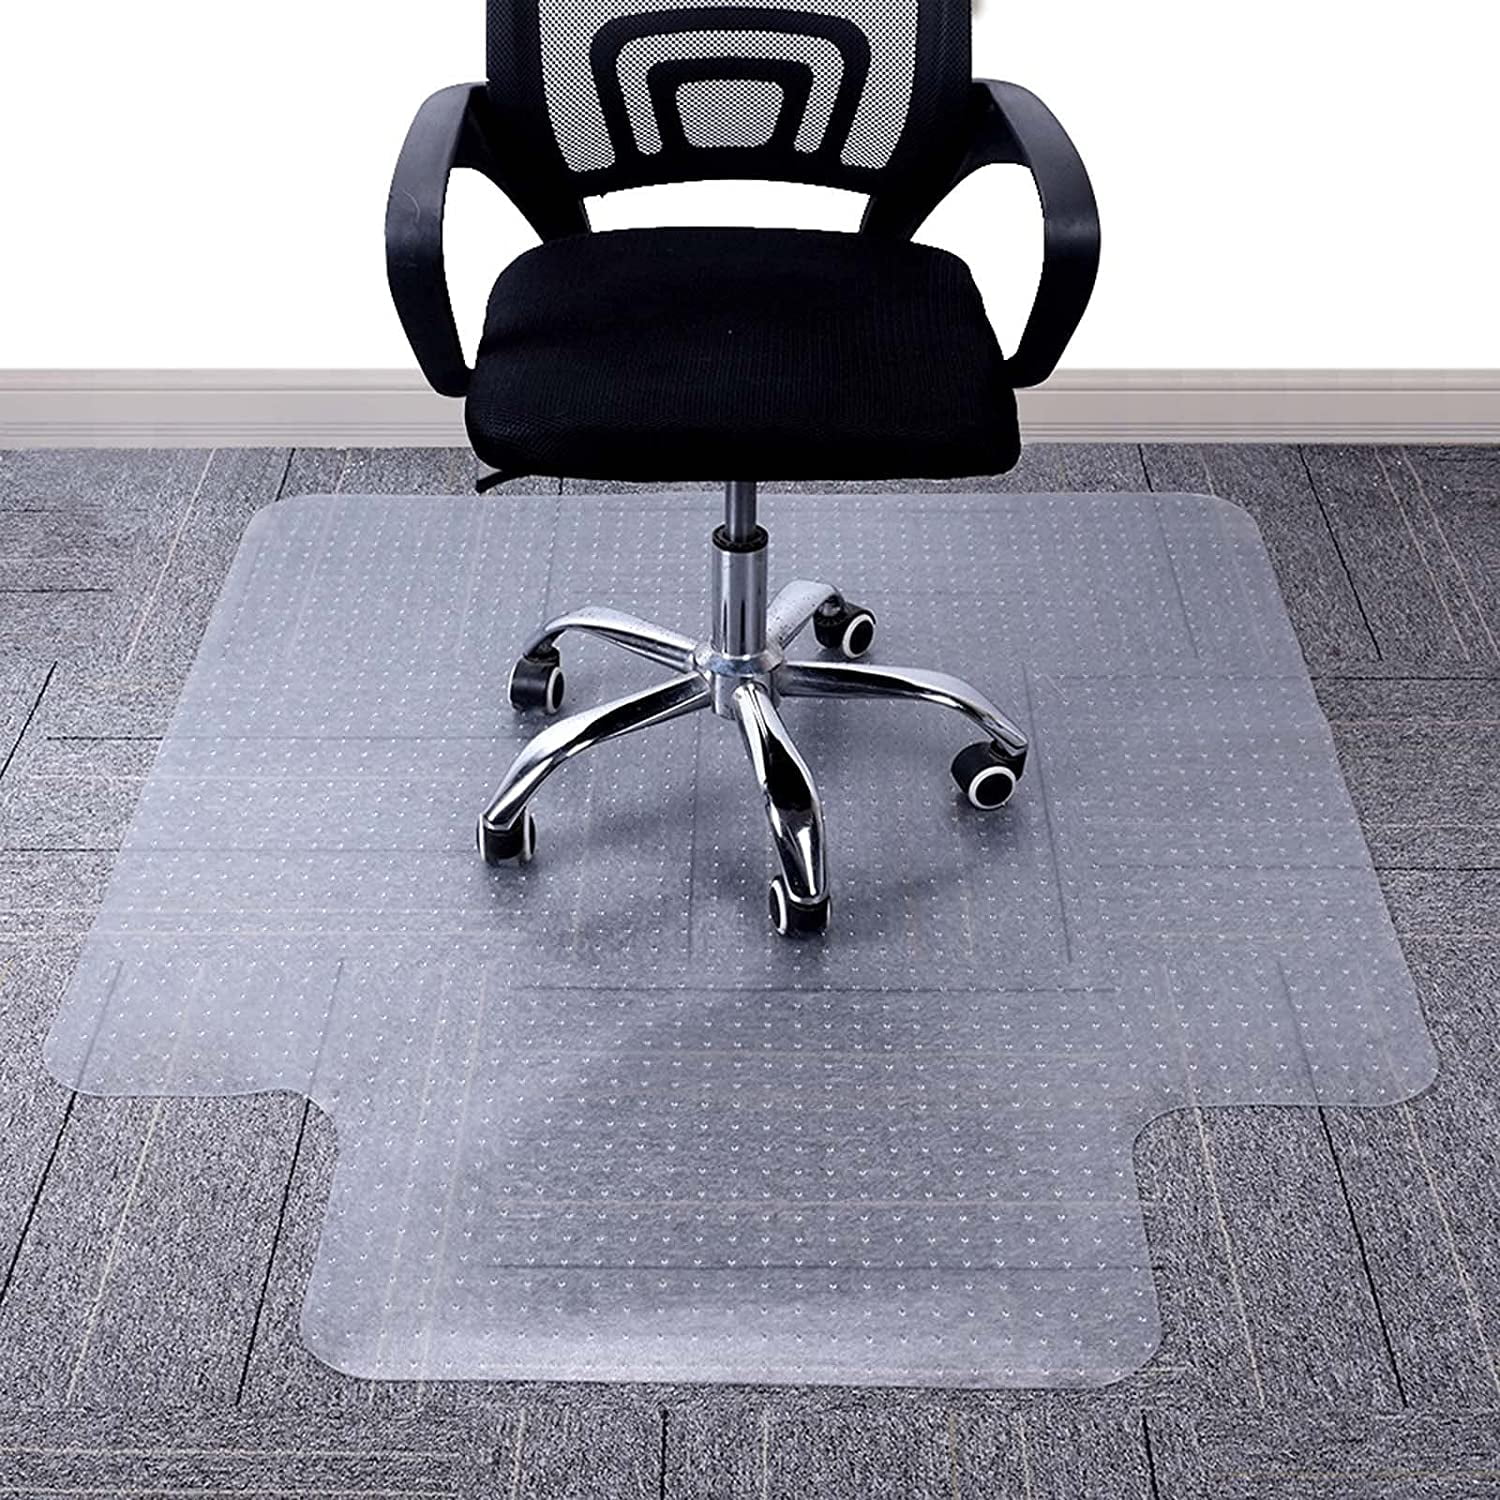 36 x 48 PVC Chair Mat Office Chair Desks Mats for Hard Floor Multi-Purpose PVC Floor Protector with Lip for Home 